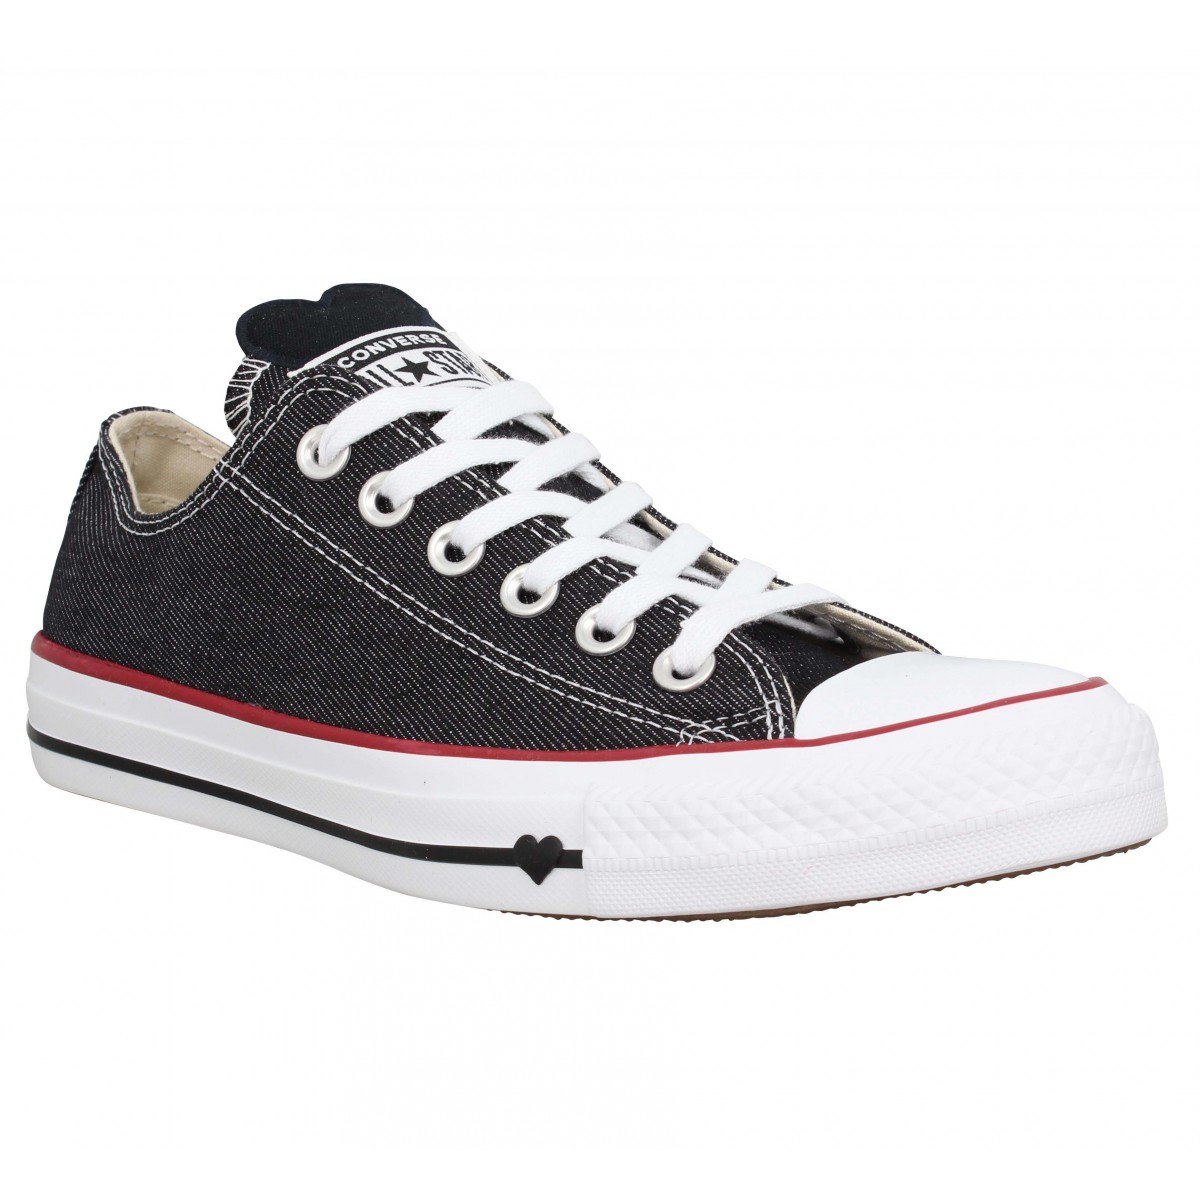 converse jeans all star